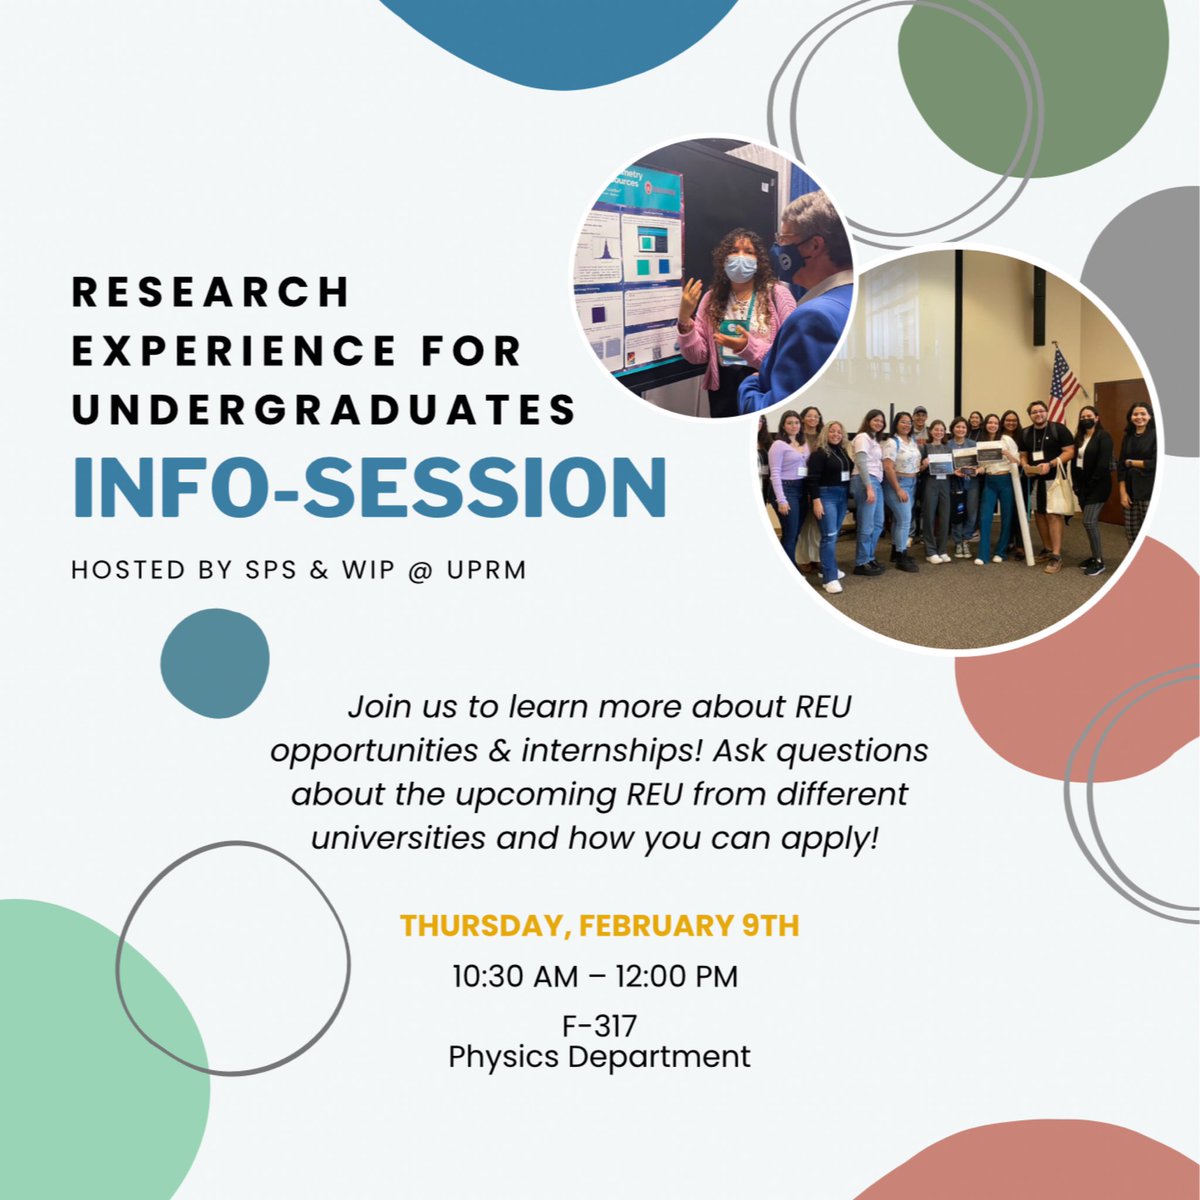 The Society of Physics Students & Women in Physics (@WomeninPhysUPRM) are hosting an REU Info-session for upcoming internships, programs & research opportunities for Summer 2023! If you're interested in joining virtually, let us know!